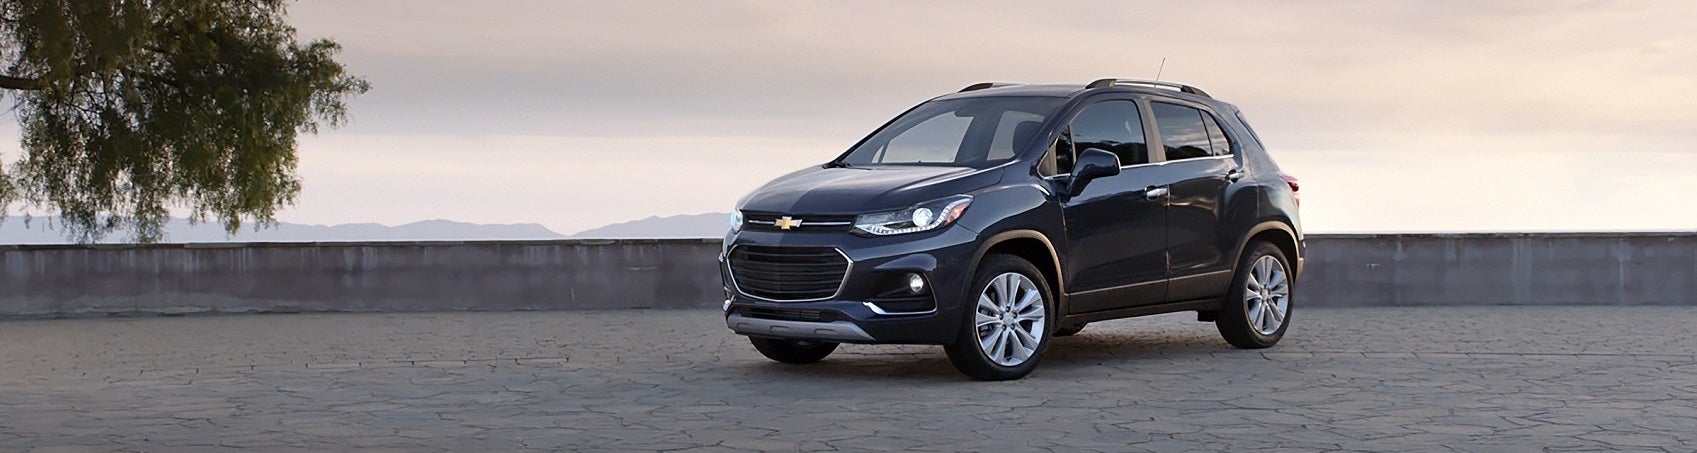 Chevy Trax for Sale near Columbus, OH